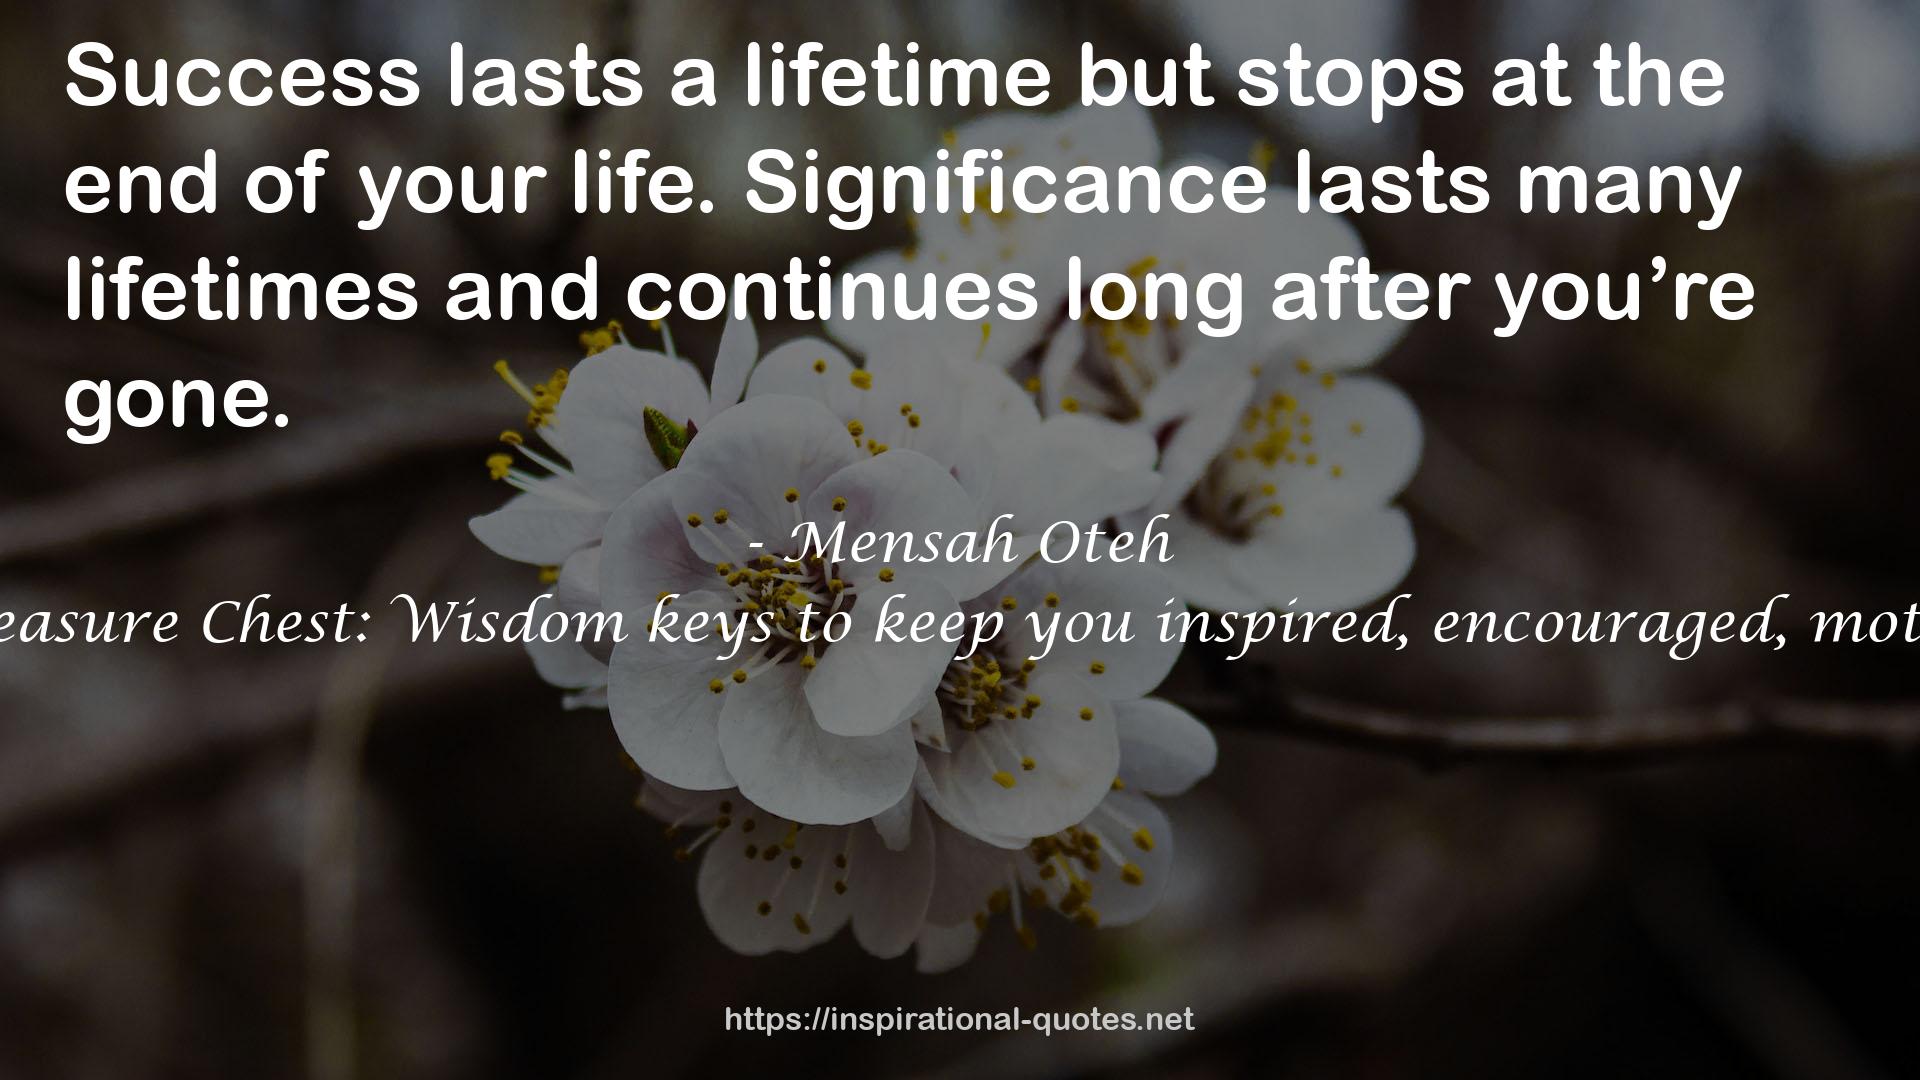 many lifetimes  QUOTES